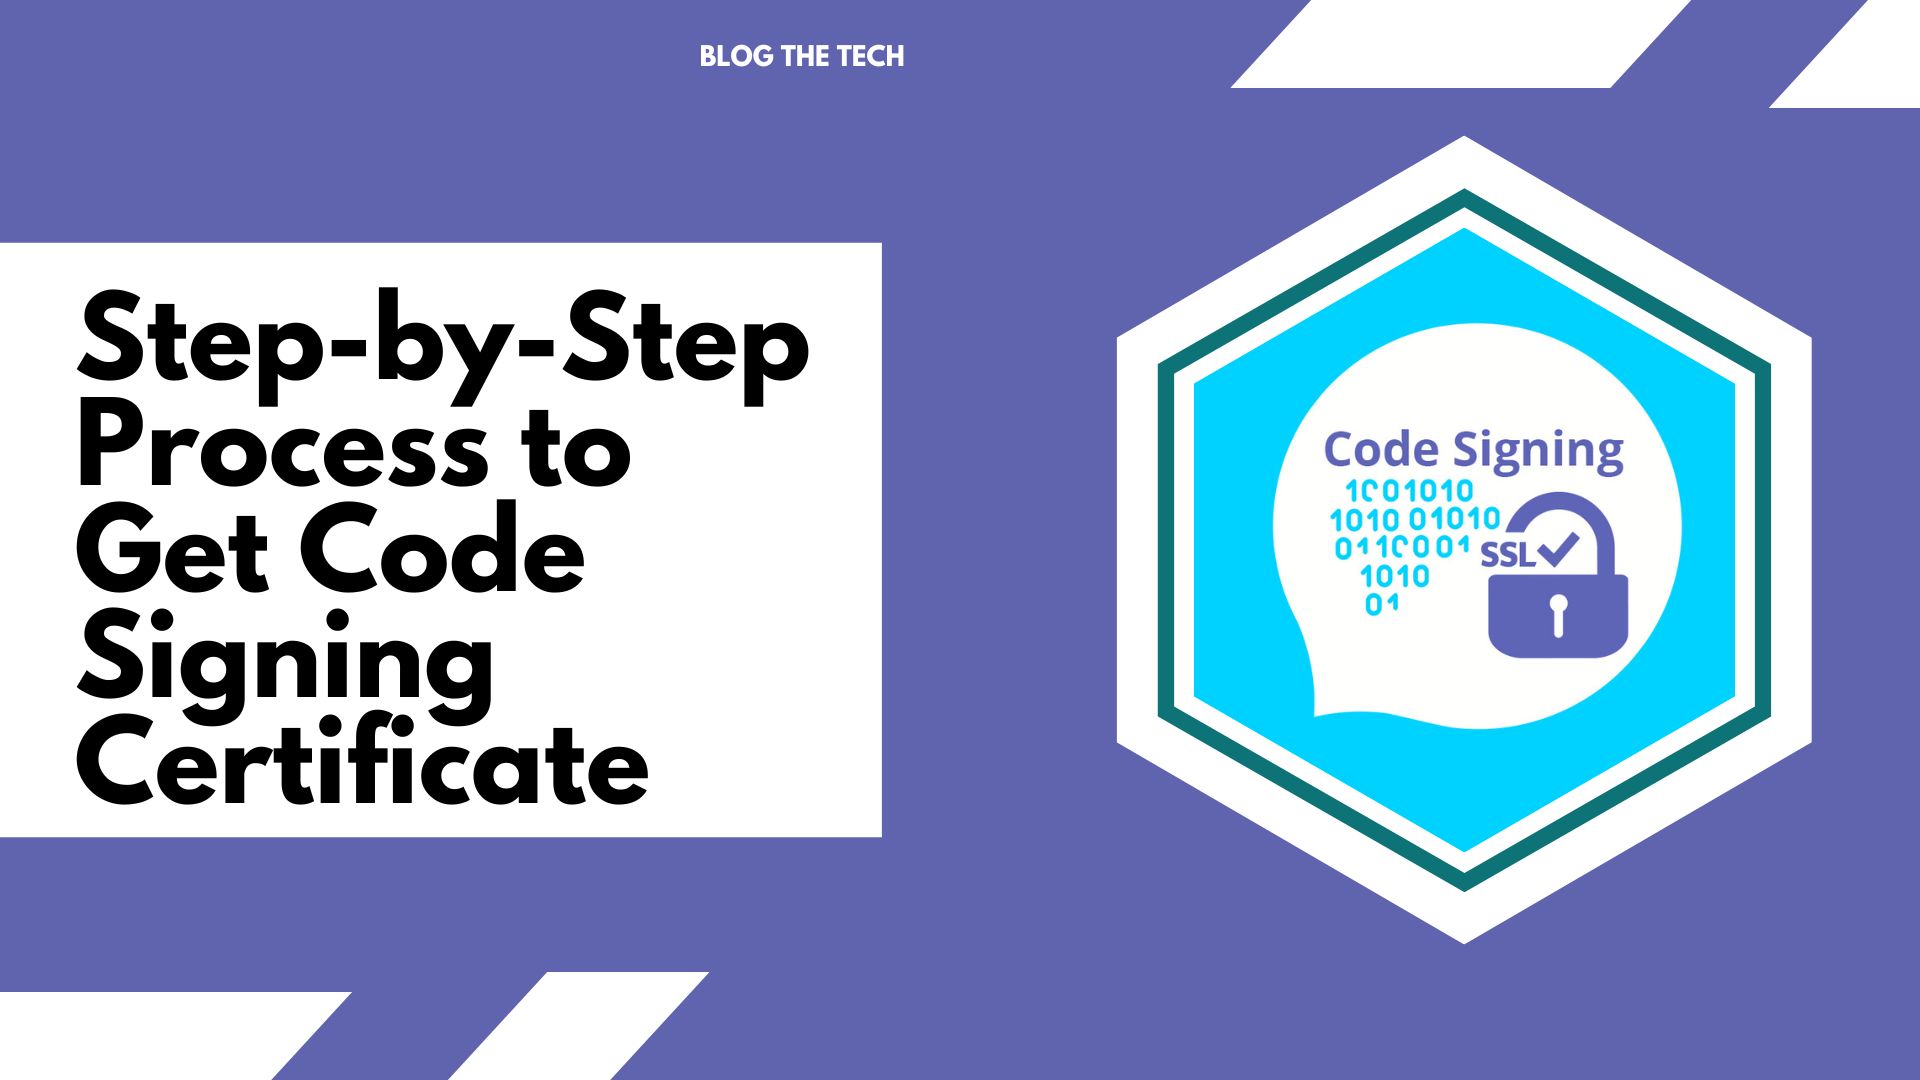 Step-by-Step Process to Get Code Signing Certificate